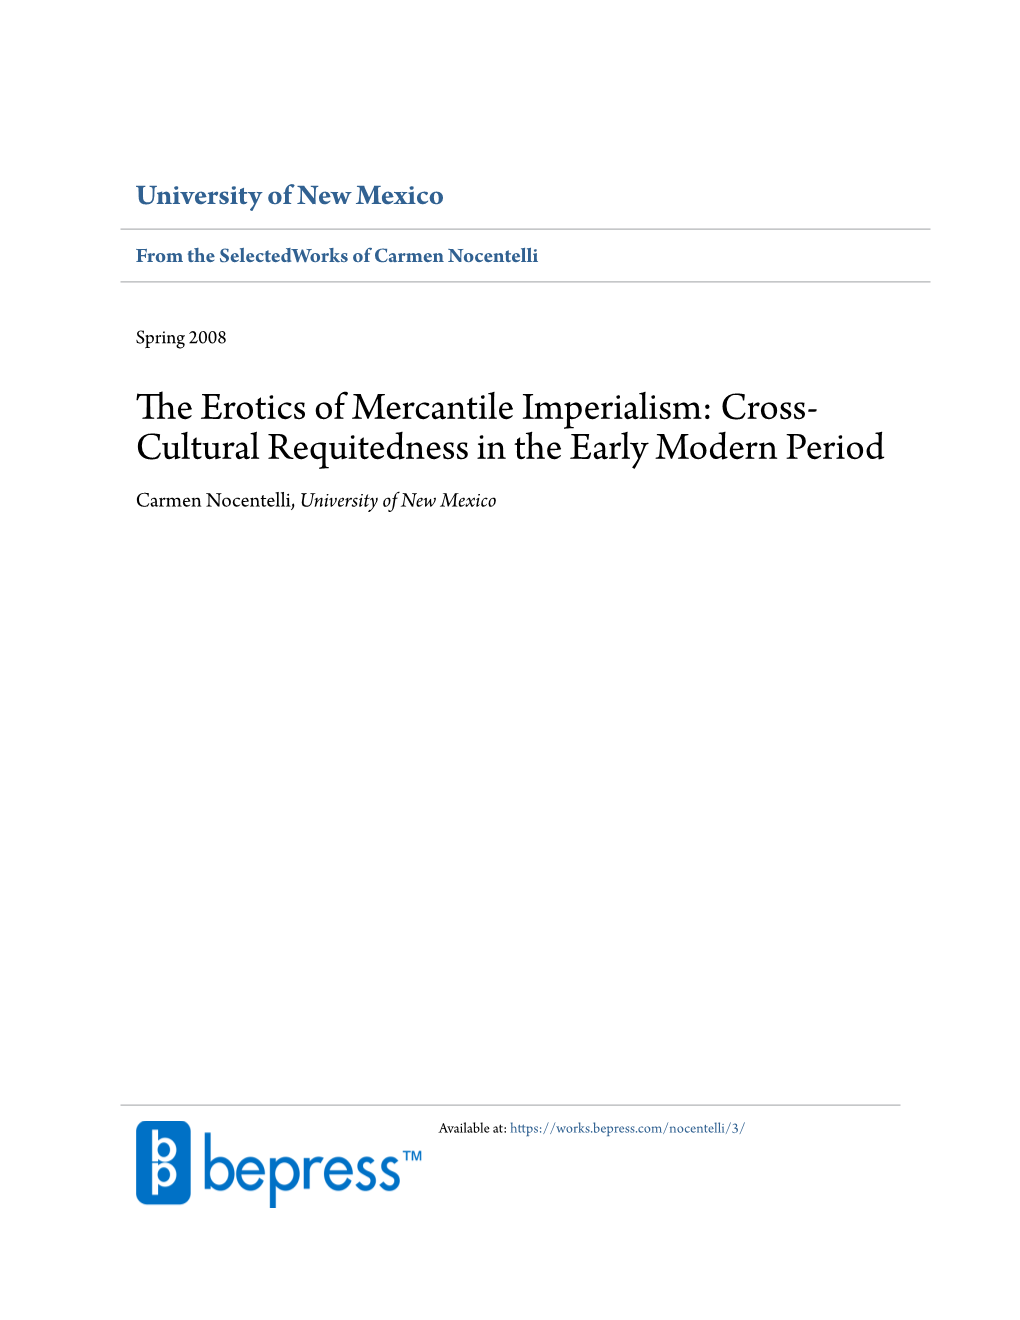 The Erotics of Mercantile Imperialism: Cross-Cultural Requitedness in the Early Modern Period Carmen Nocentelli